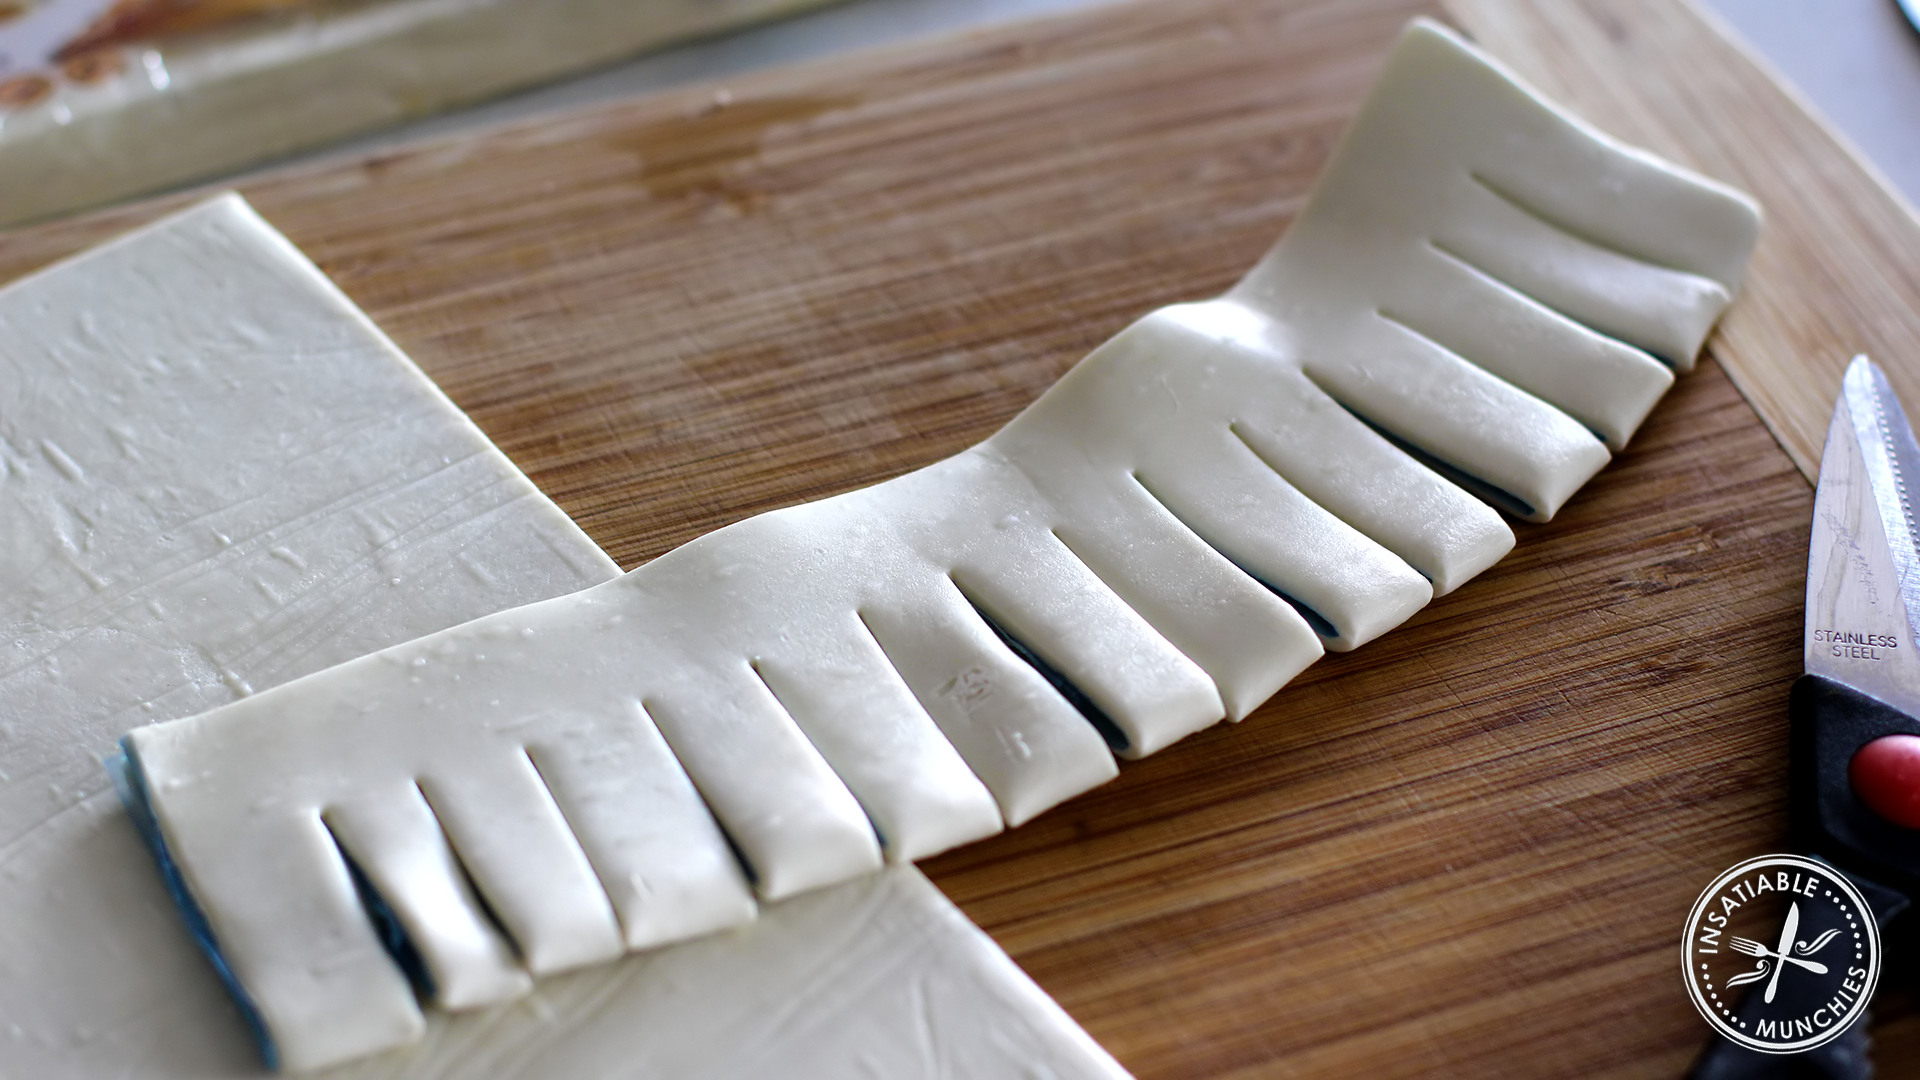 Using scissors, make cuts into the folded side of the pastry. 